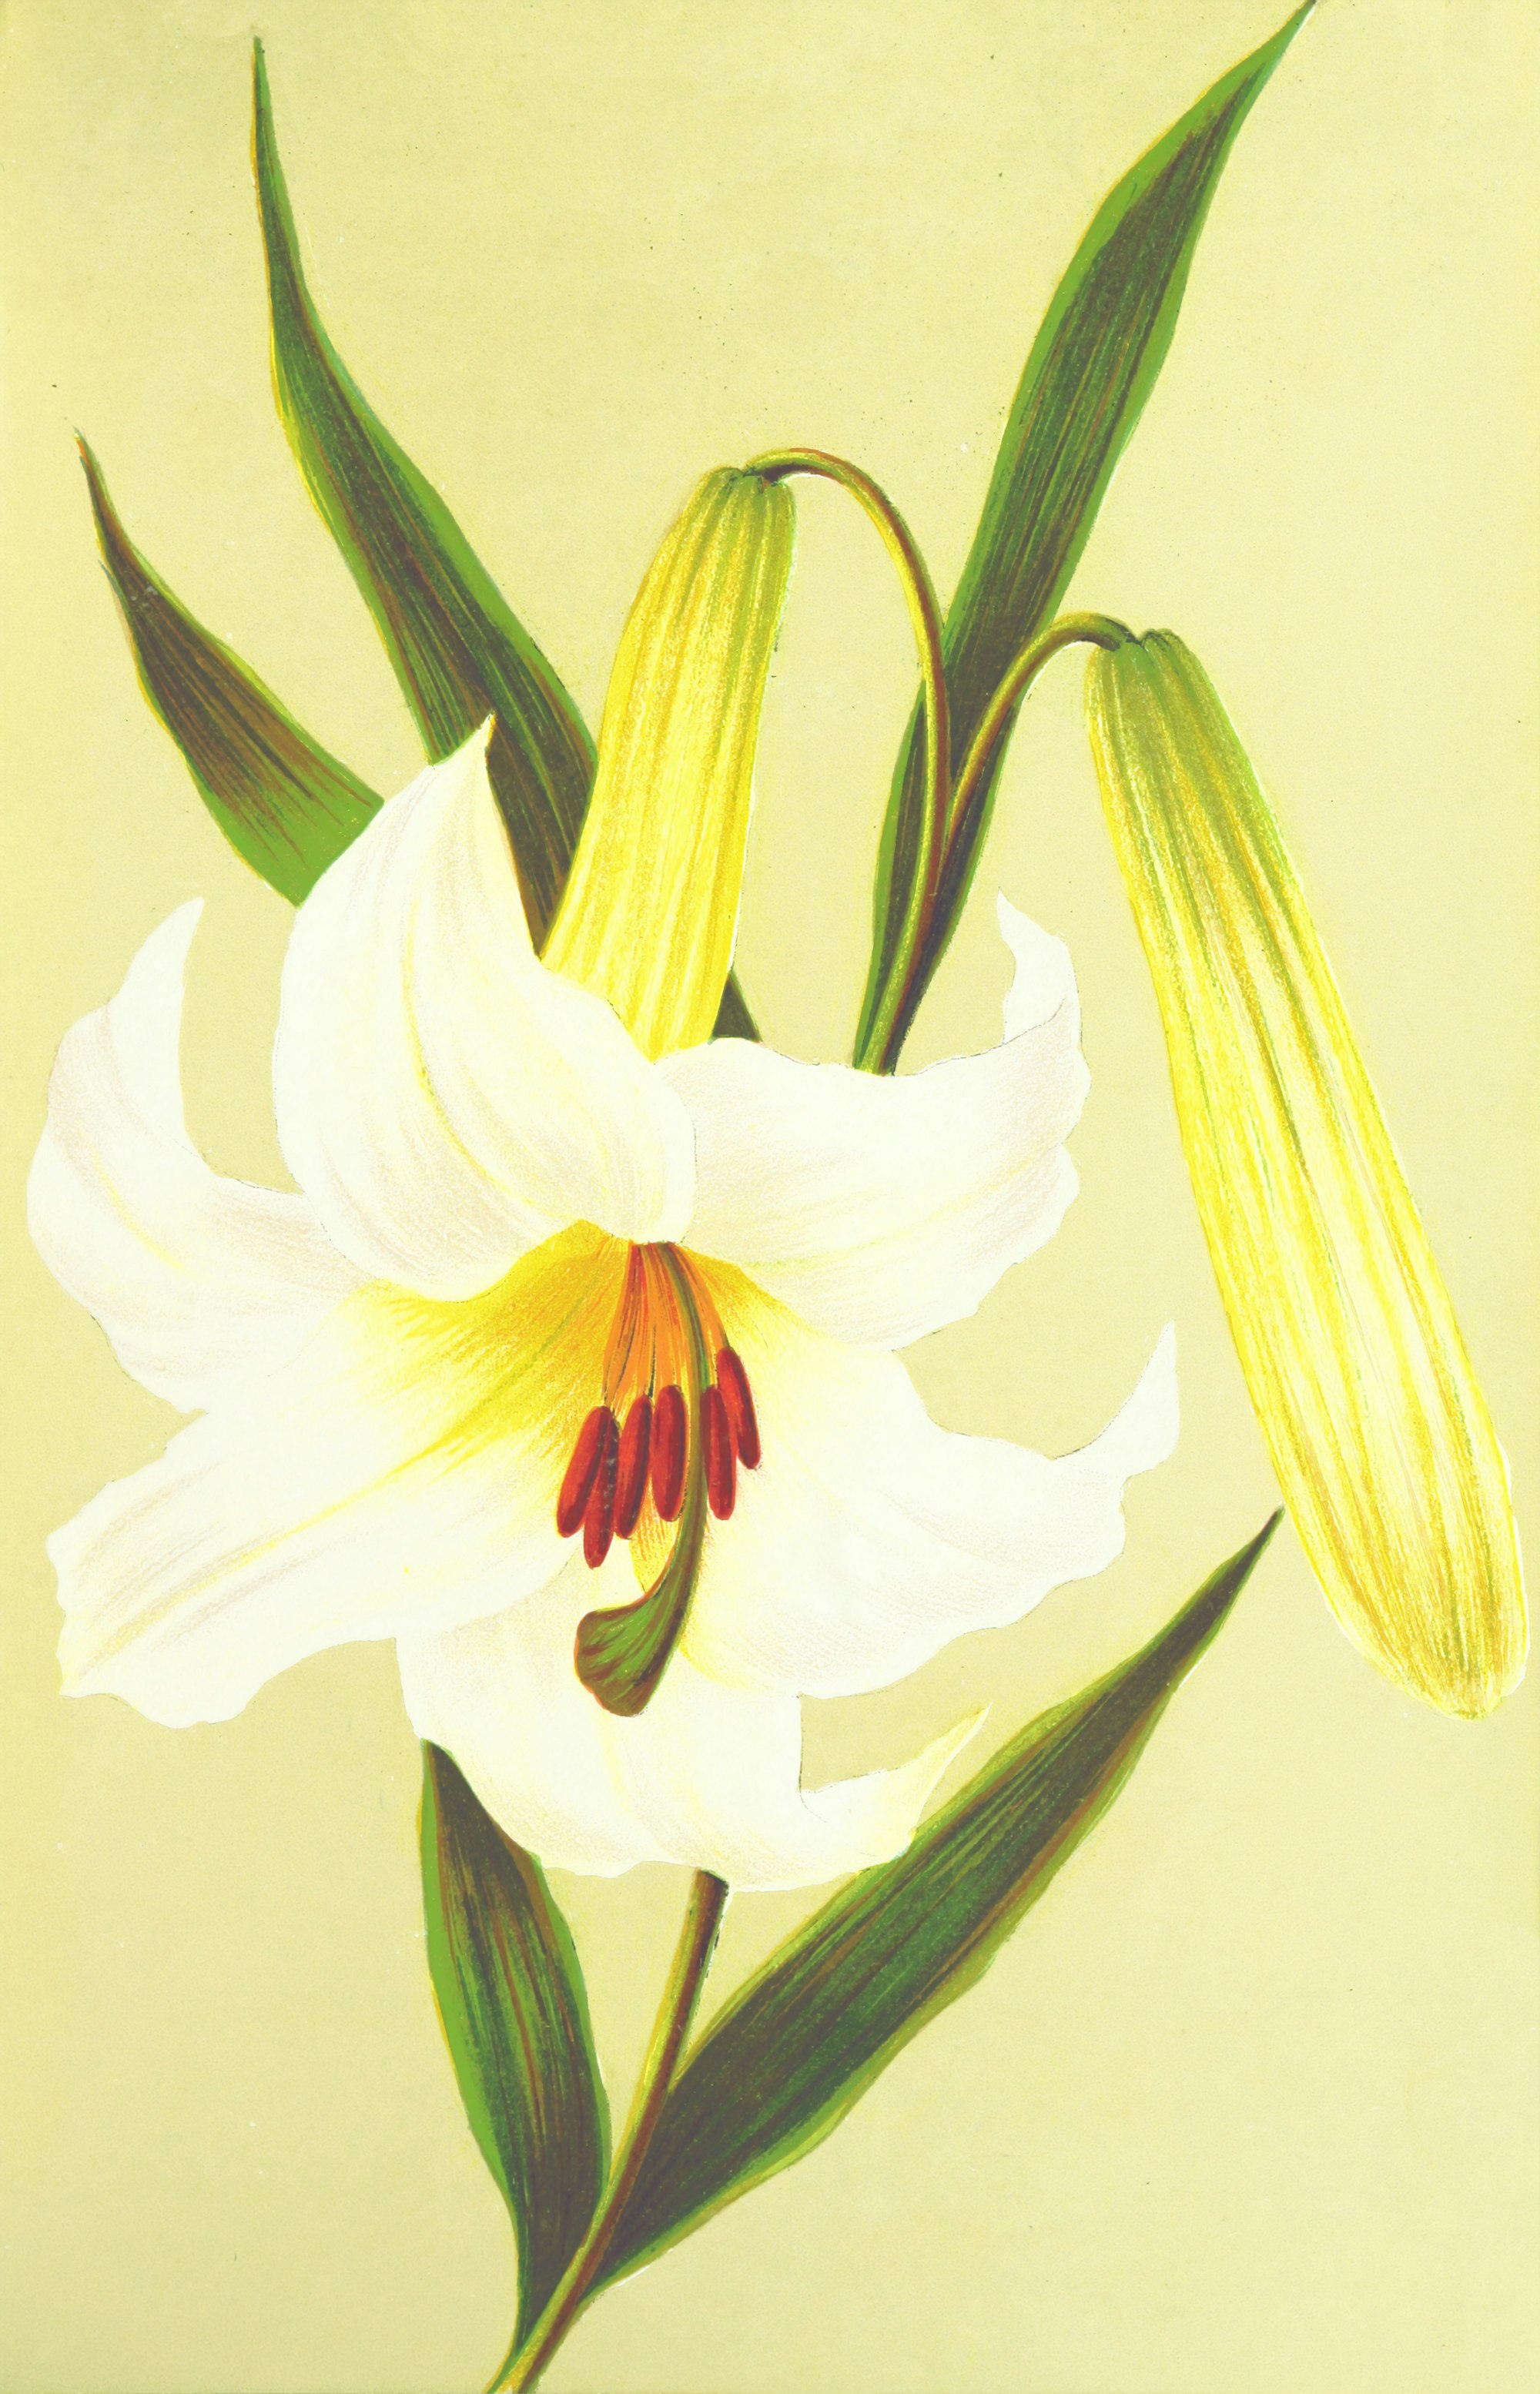 Vintage lily illustration, taken from page 193 of 'The Keble Autograph Birthday Book